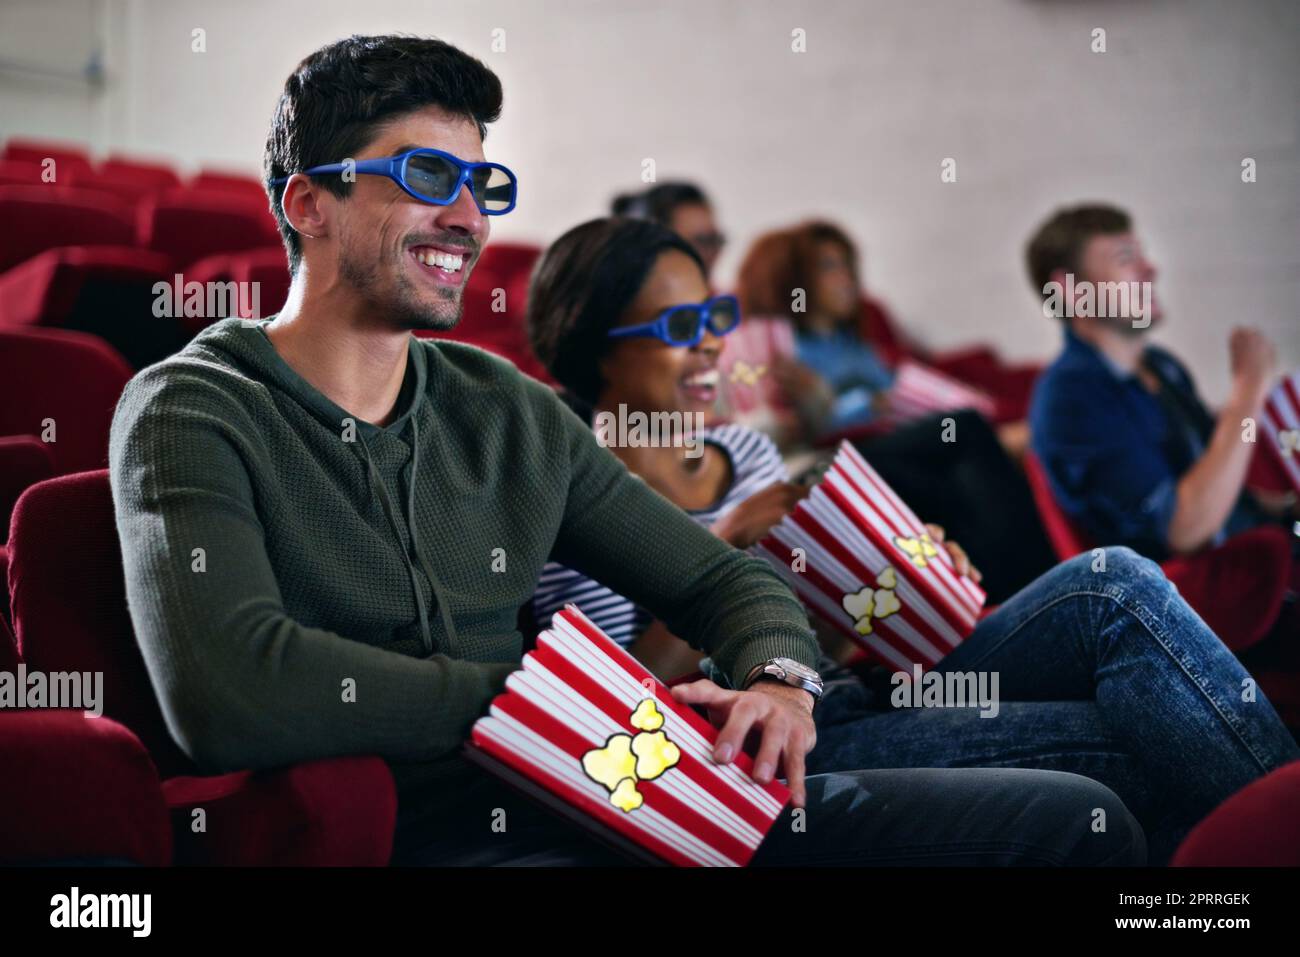 Finest quality entertainment. a man smiling while watching a 3D movie at the cinema. Stock Photo